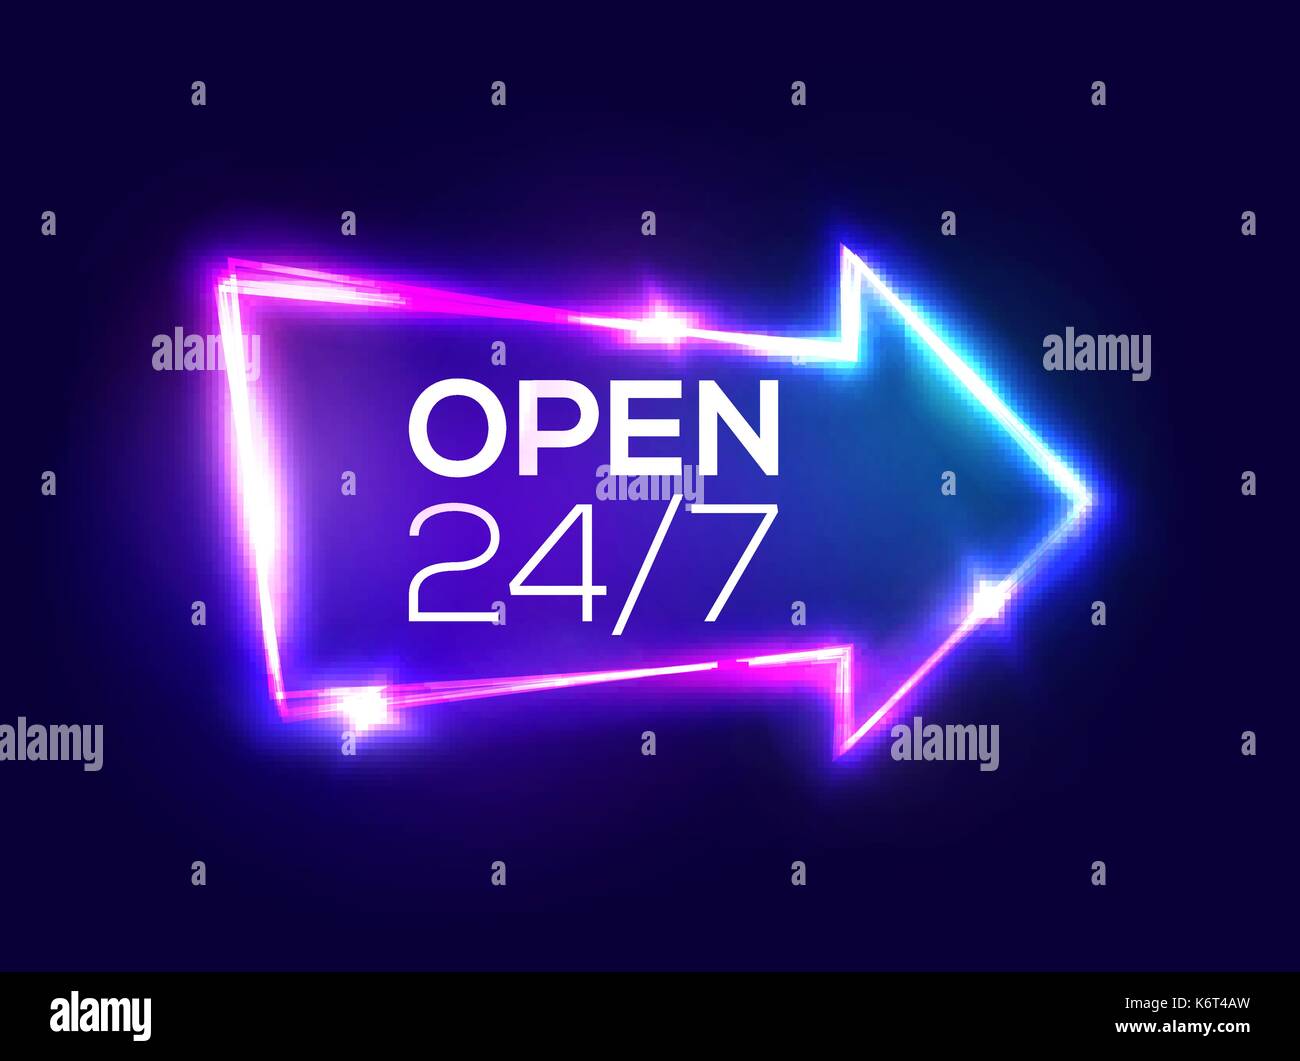 Open 24 7 Hours. Night Club Neon Sign. 3d Retro Light Bar Arrow Pointer With Neon Effect. Techno Frame On Dark Blue Backdrop. Electric Street Banner Design. Colorful Vector Illustration in 80s Style. Stock Vector